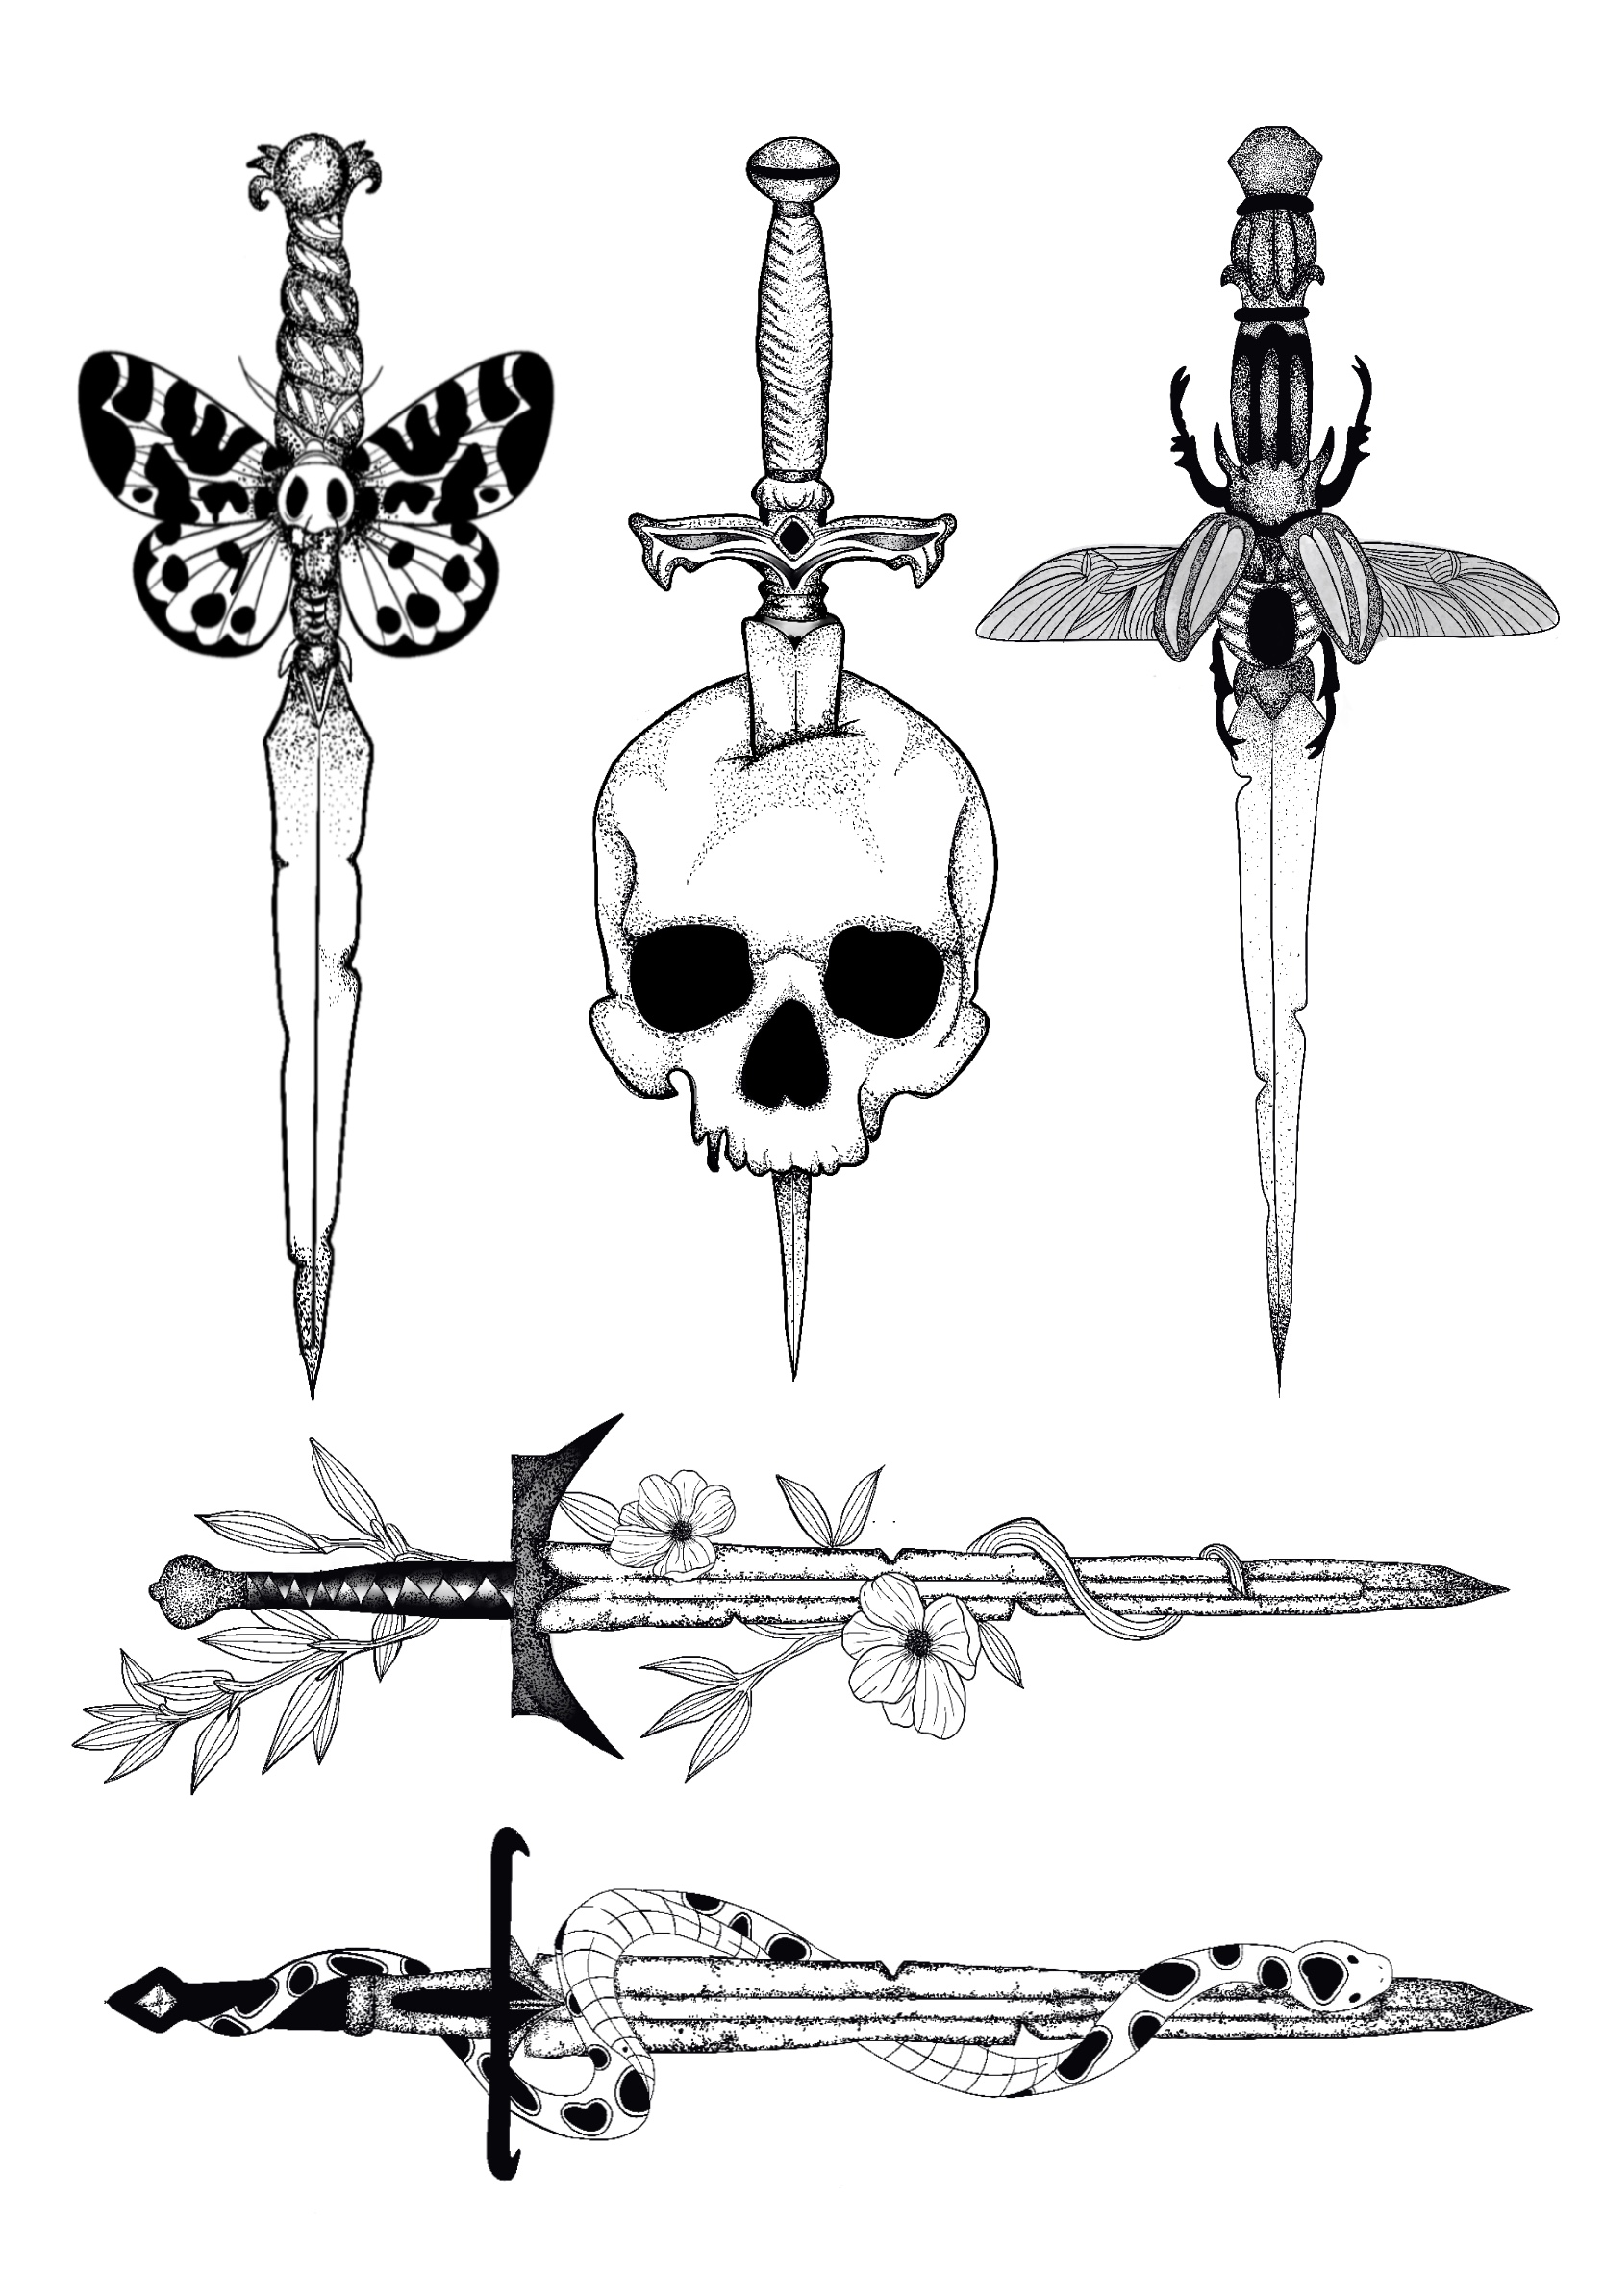 BA Illustration work by Mia Sains showing detailed dot work on a tattoo flash sheet, of five swords with moth wings, skulls, flowers, snakes and beetles.